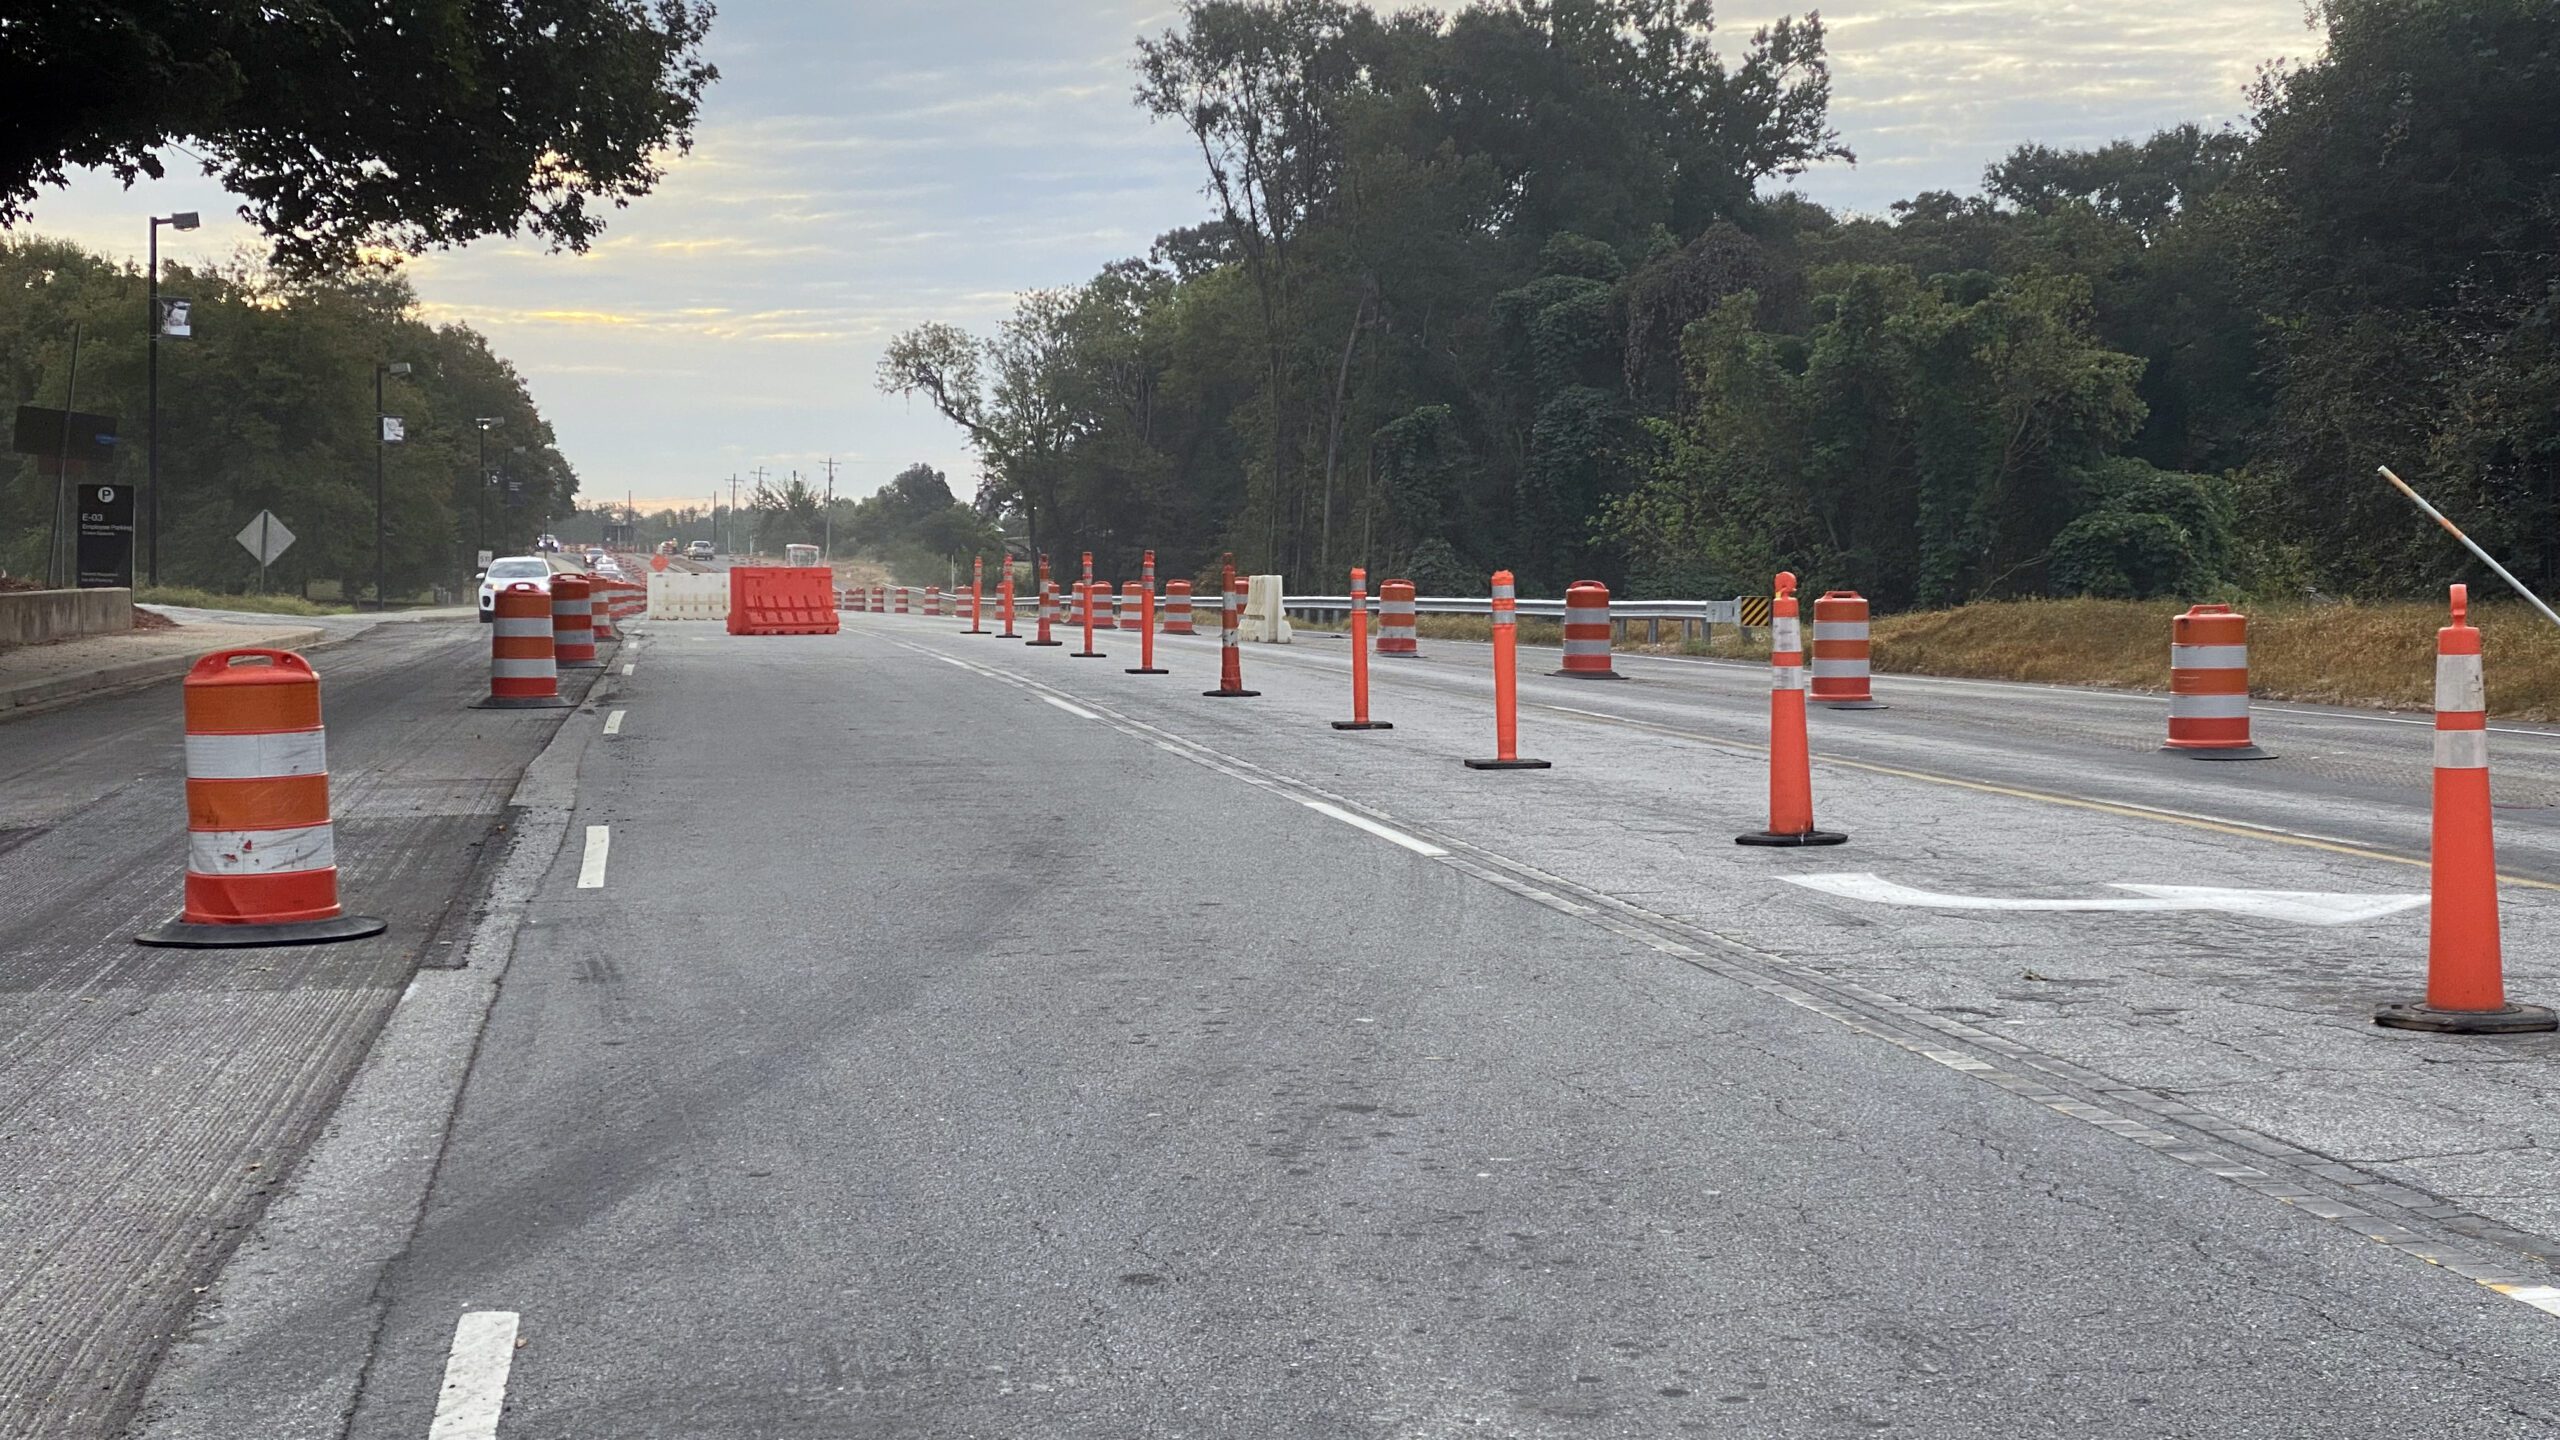 A view of Perimeter Road looking eastbound from the Williamson Road intersection. Orange barrels and cones line the median and lane markers